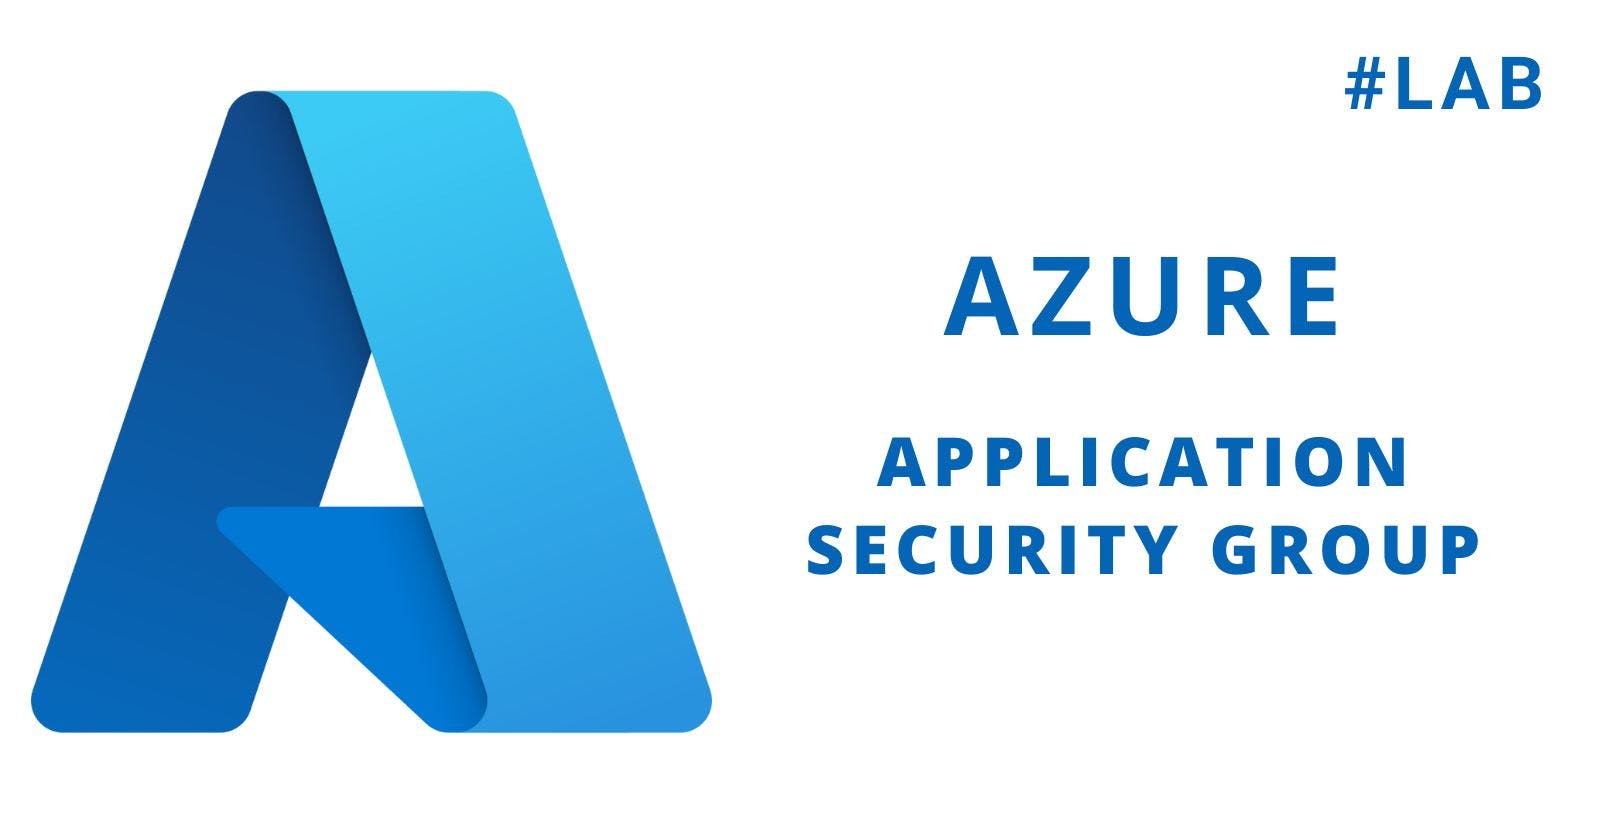 Application Security Group